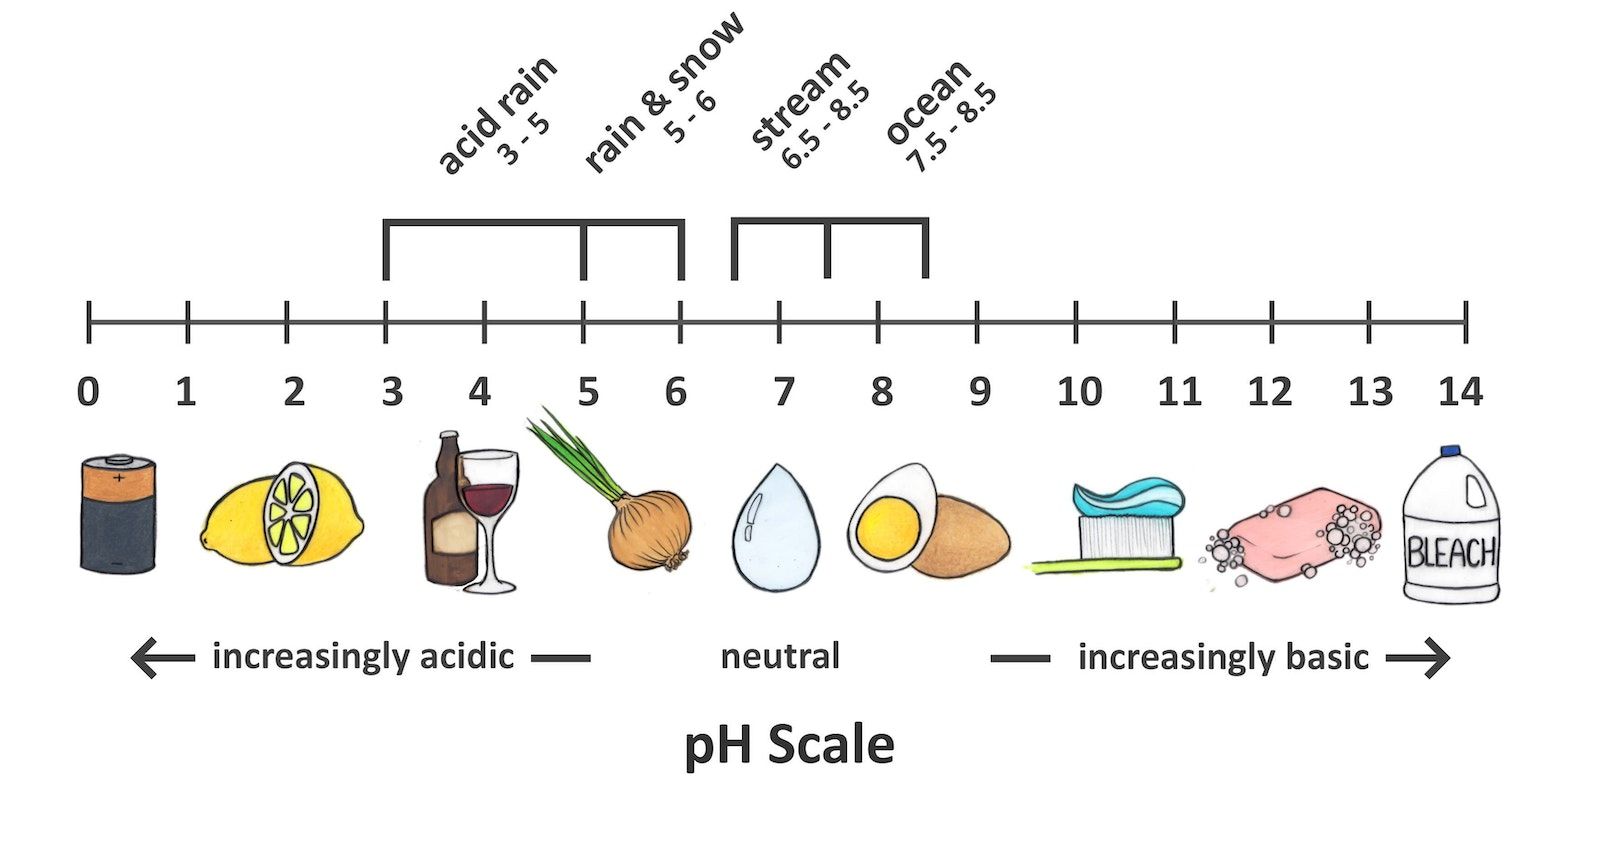 Drawing of a pH scale showing pH values between 0 and 14. Neutral values are indicated near pH 7, increasingly acidic pH is indicated toward pH 0, and increasingly alkaline pH values are shown between pH 7 and 14. Various items (e.g., water, soap) as are depicted along the scale at their respective pH values.